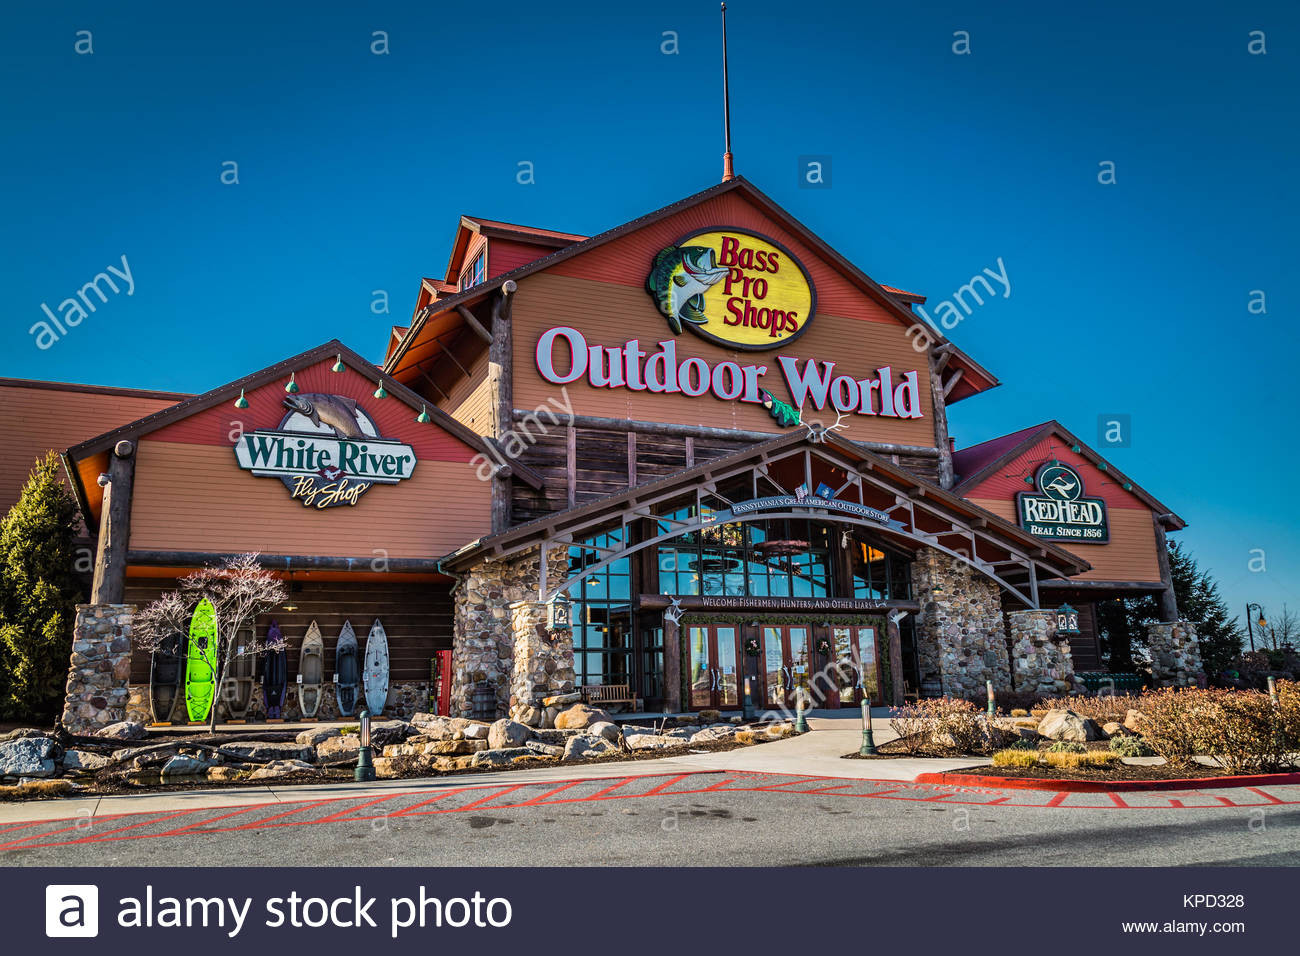 Best ideas about Pa Outdoor Shop
. Save or Pin Bass Pro Shop Stock s & Bass Pro Shop Stock Now.